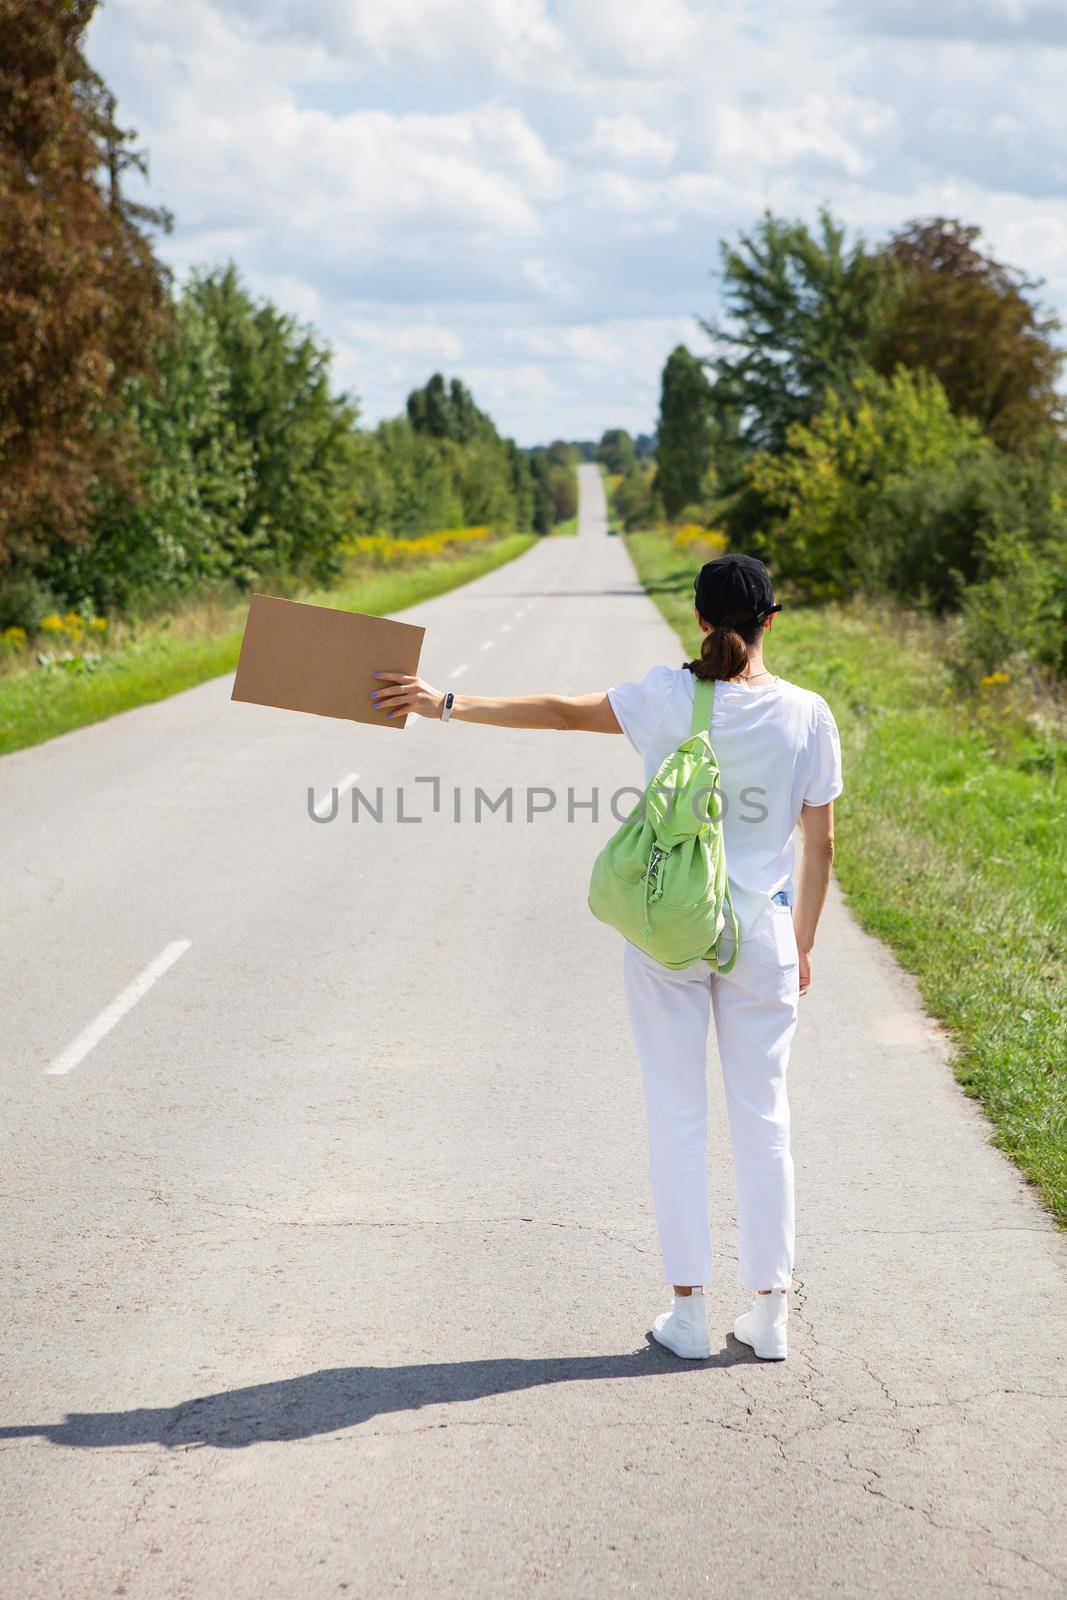 A beautiful girl with a backpack on her shoulder stands on the road brakes the car, hitchhiking, adventure, tourism, alone